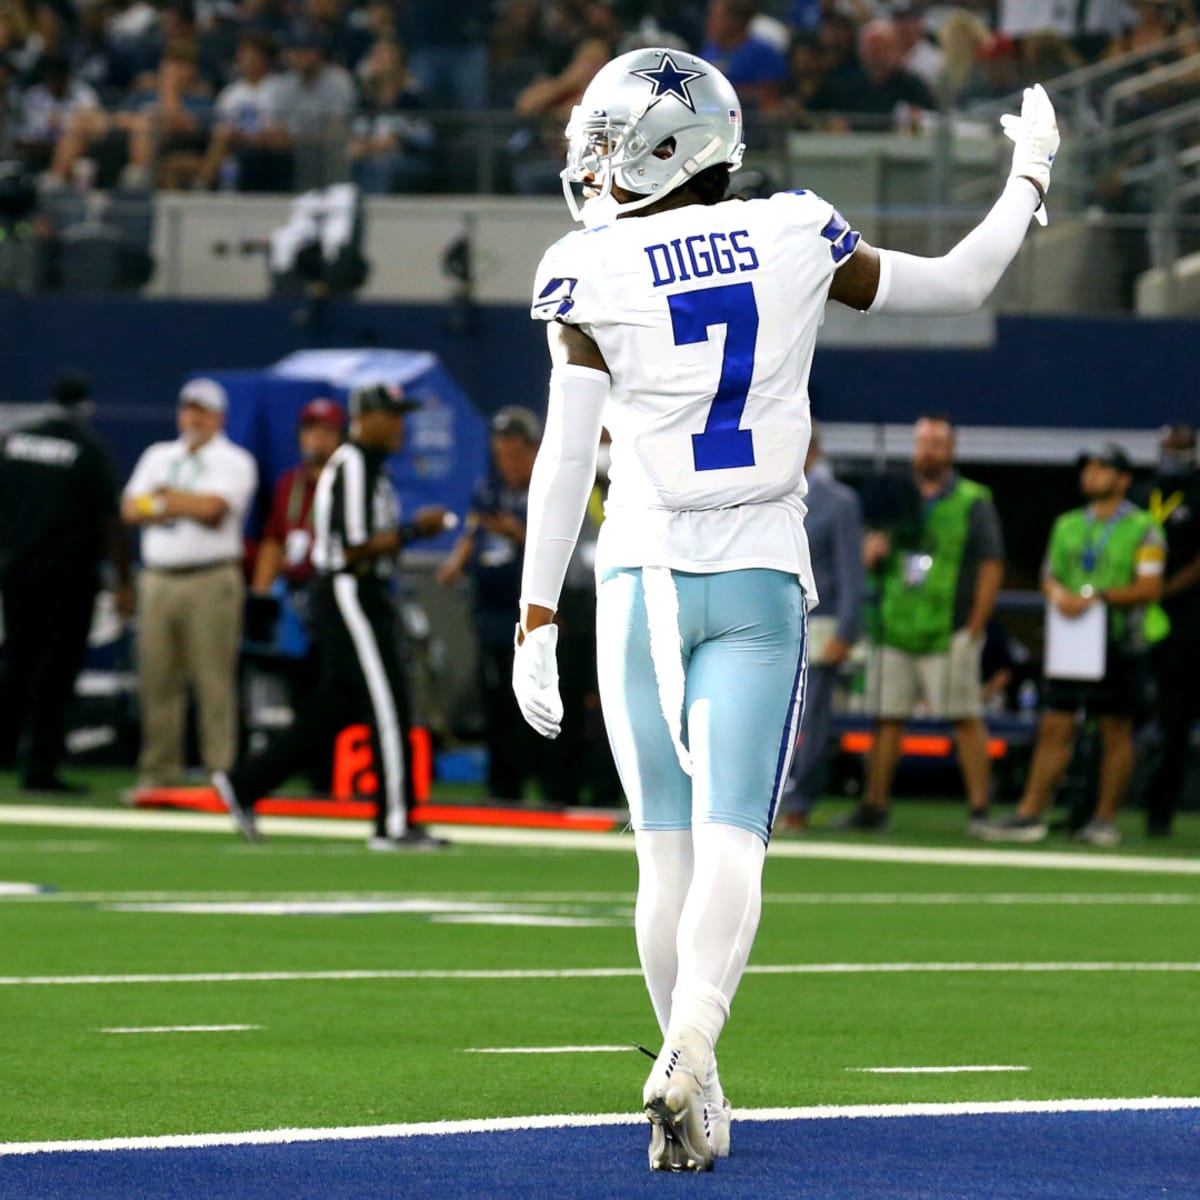 Cooper Rush took the Cowboys' first-team snaps in practice this week -  Daily Norseman